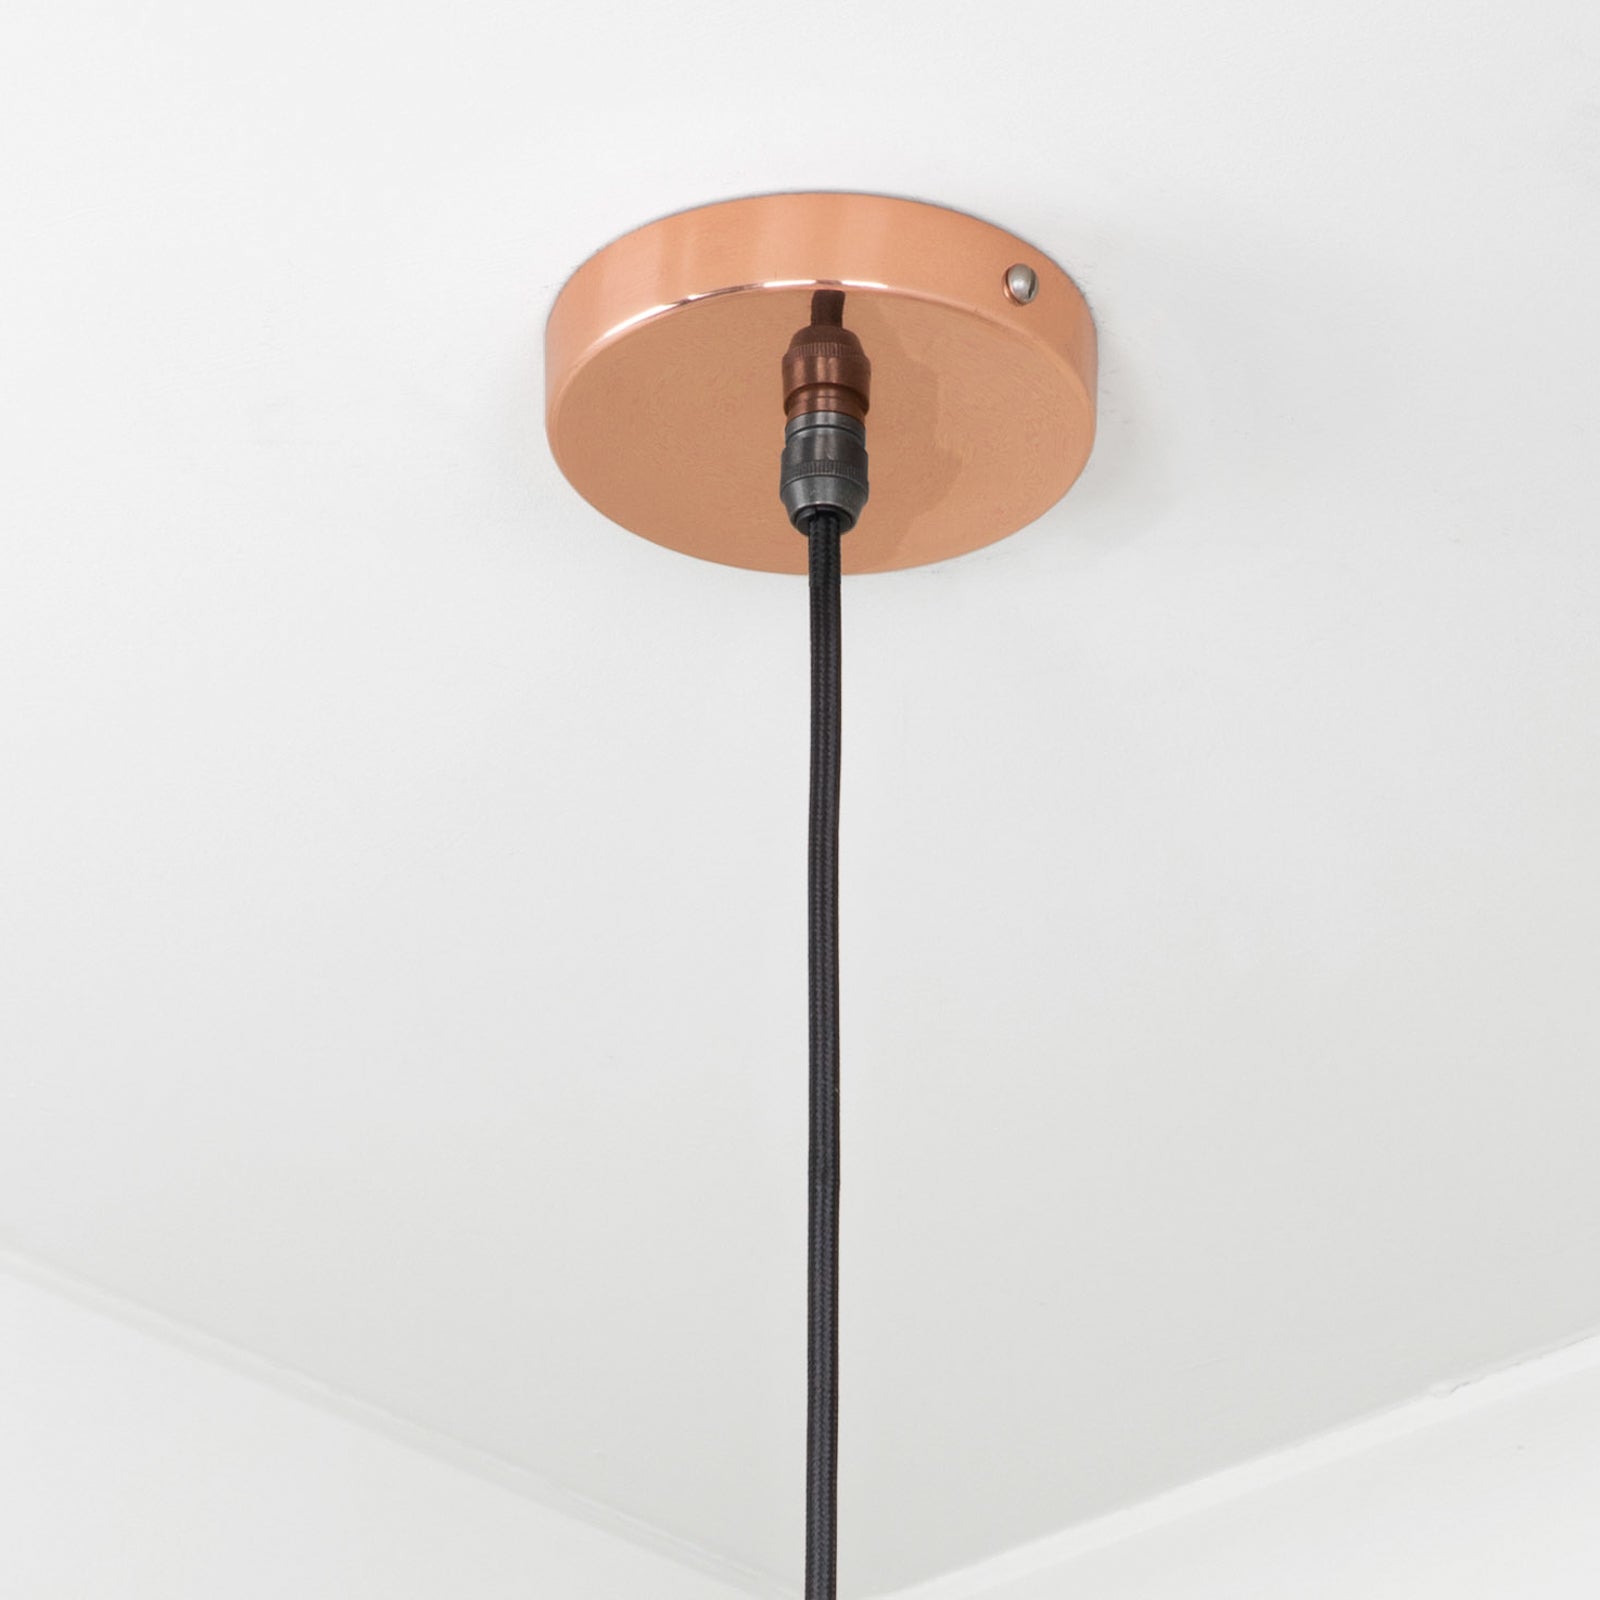 SHOW Close Up Image of Ceiling rose for Frankley Ceiling Light in Copper